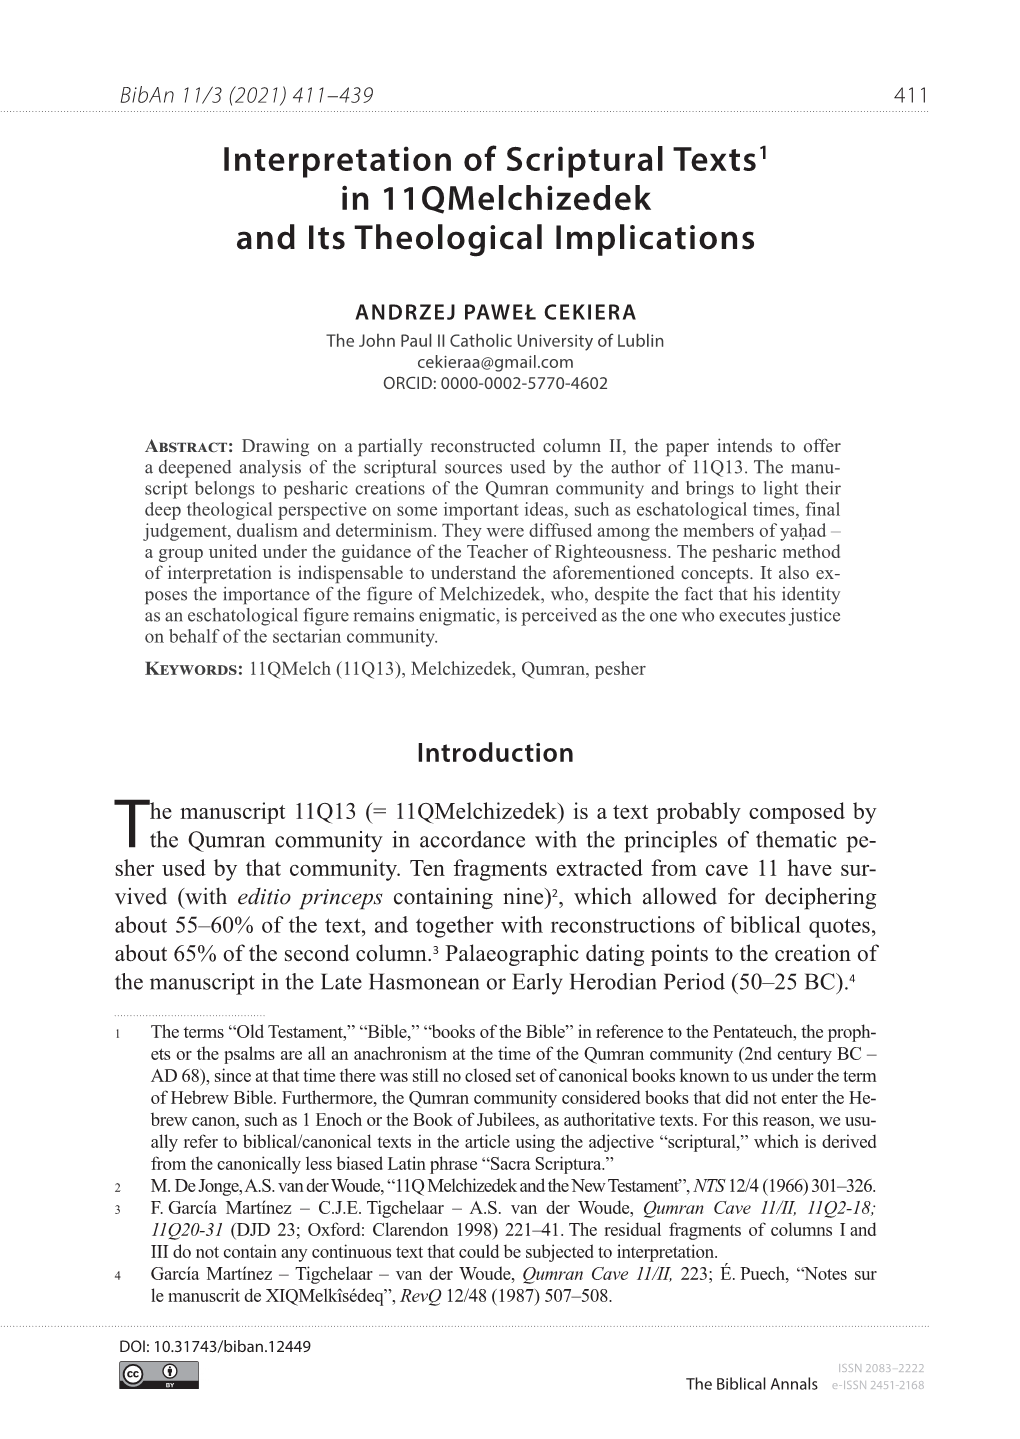 Interpretation of Scriptural Texts1 in 11Qmelchizedek and Its Theological Implications